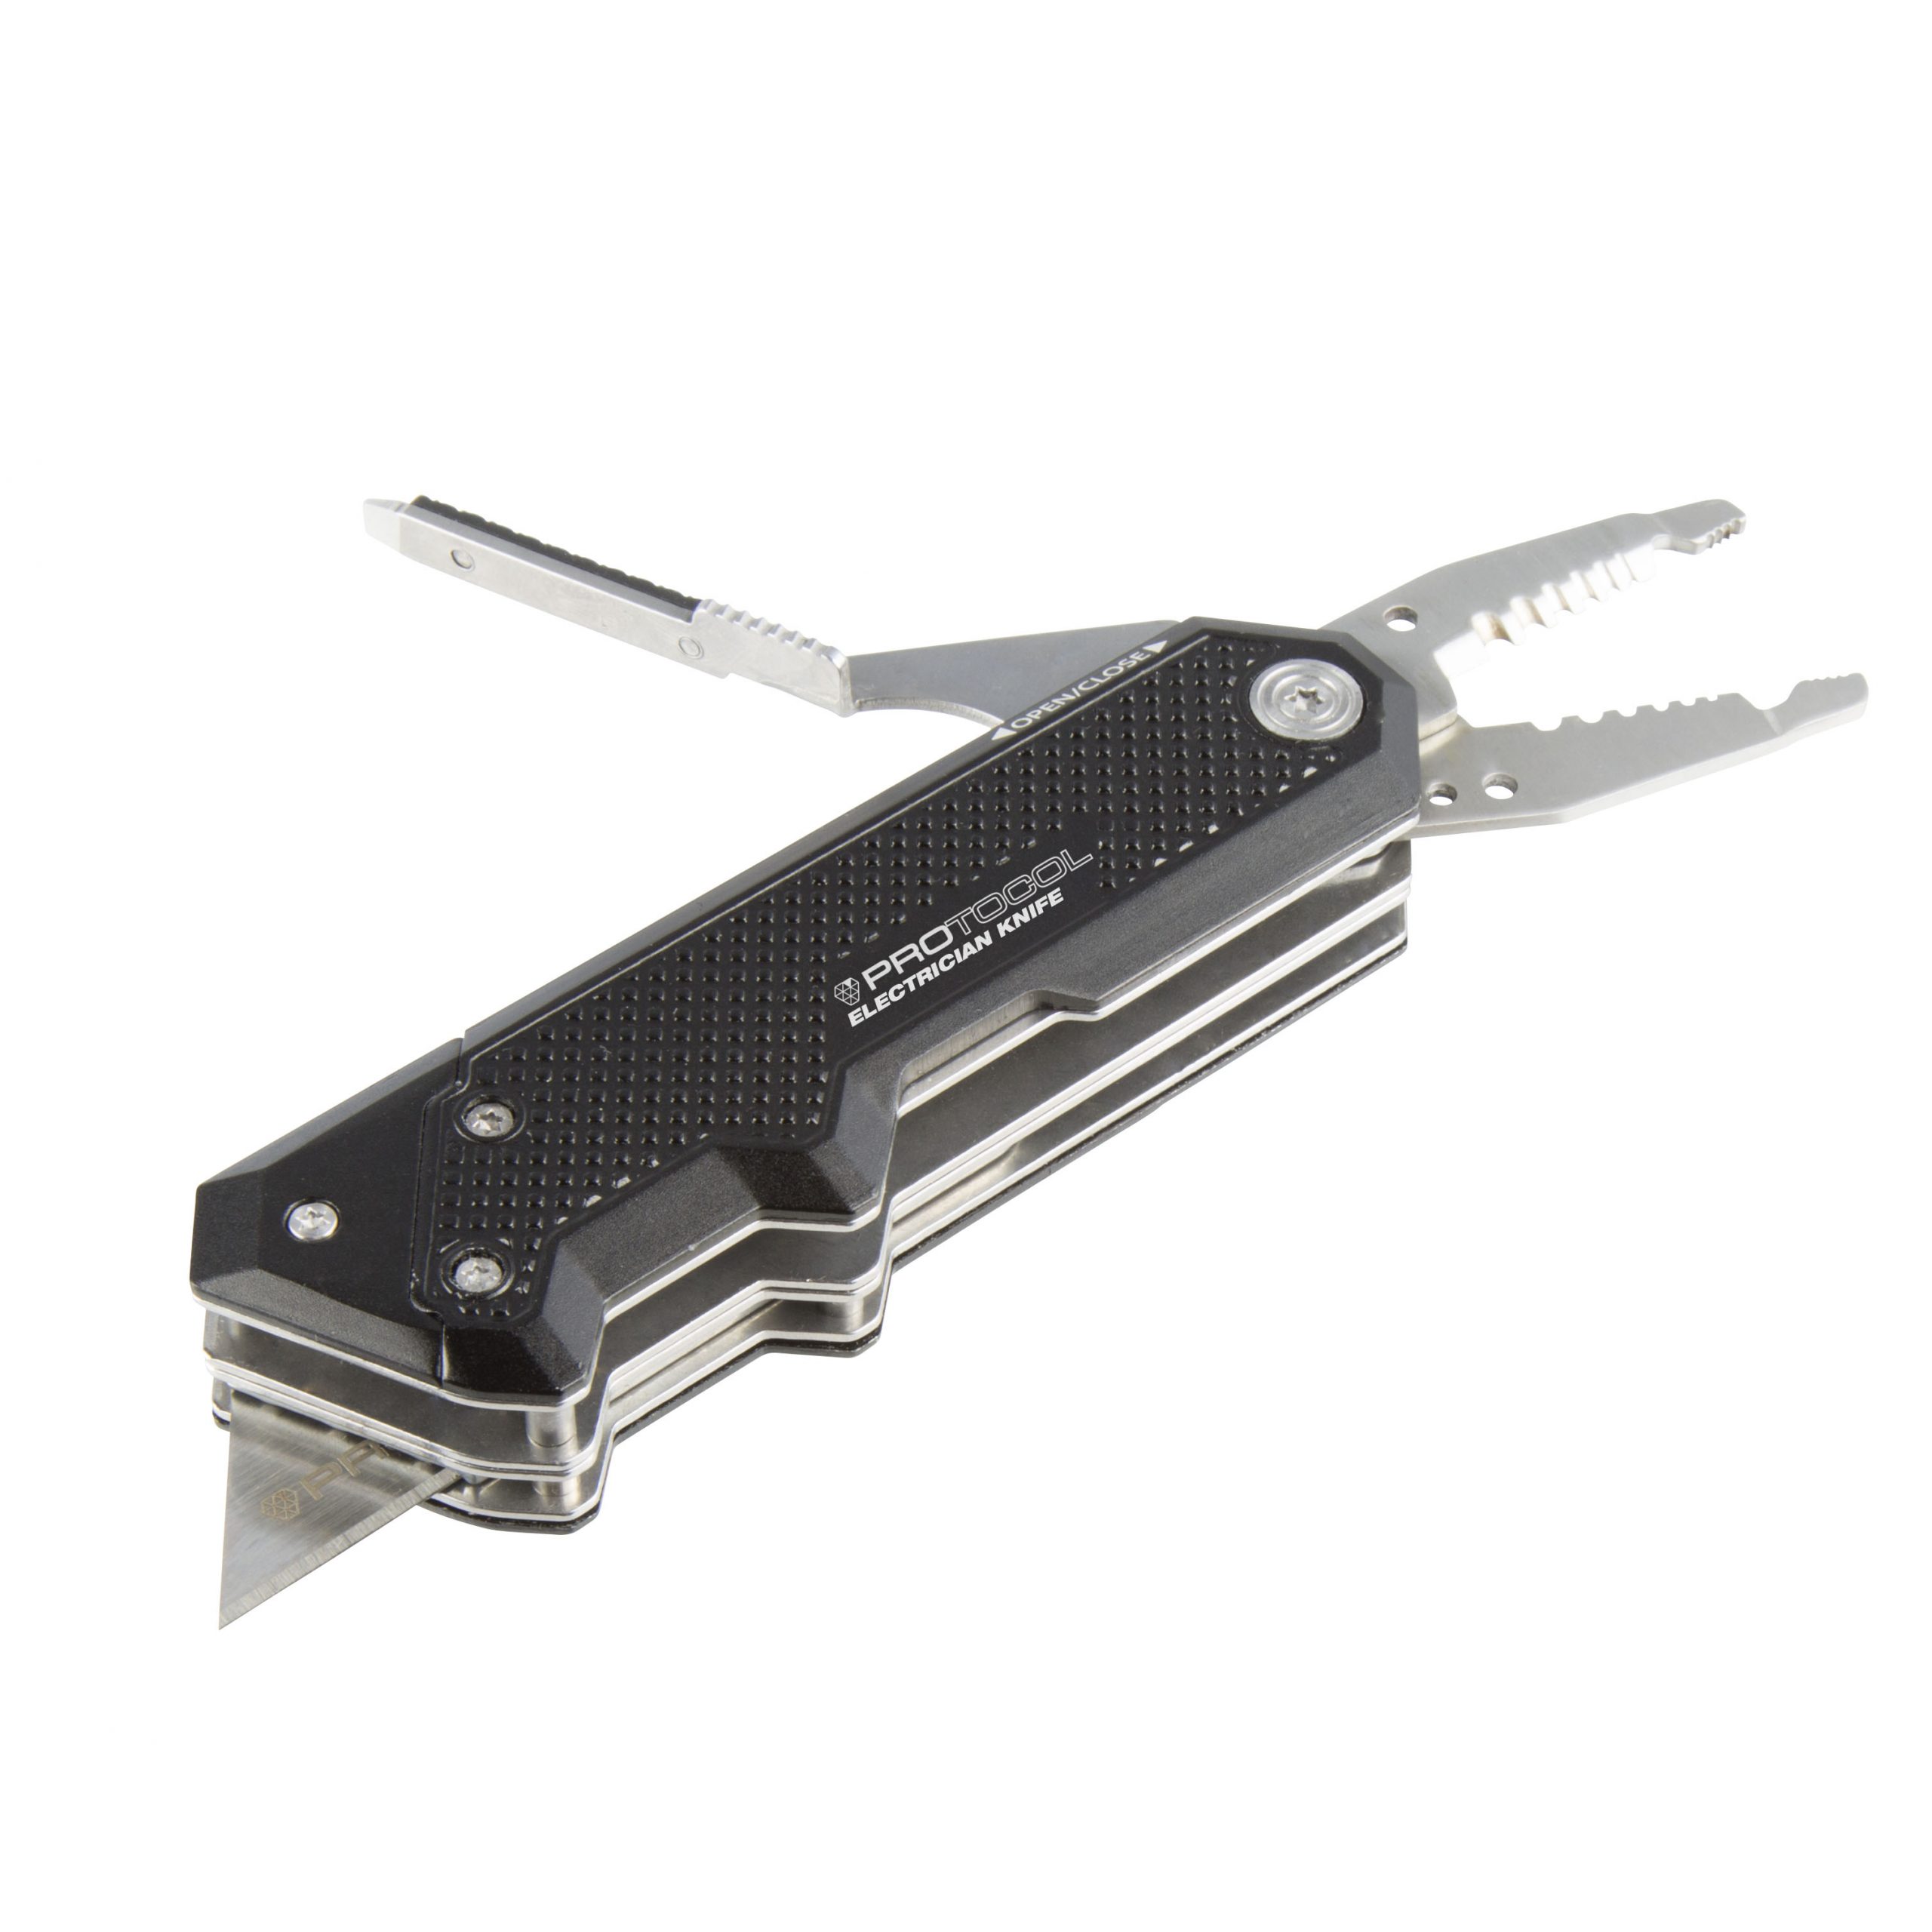 PROTOCOL Equipment K-027 Electrician's Utility Knife with Integrated Wire  Stripper, Crimper, and Screwdrivers – Chasing Kites